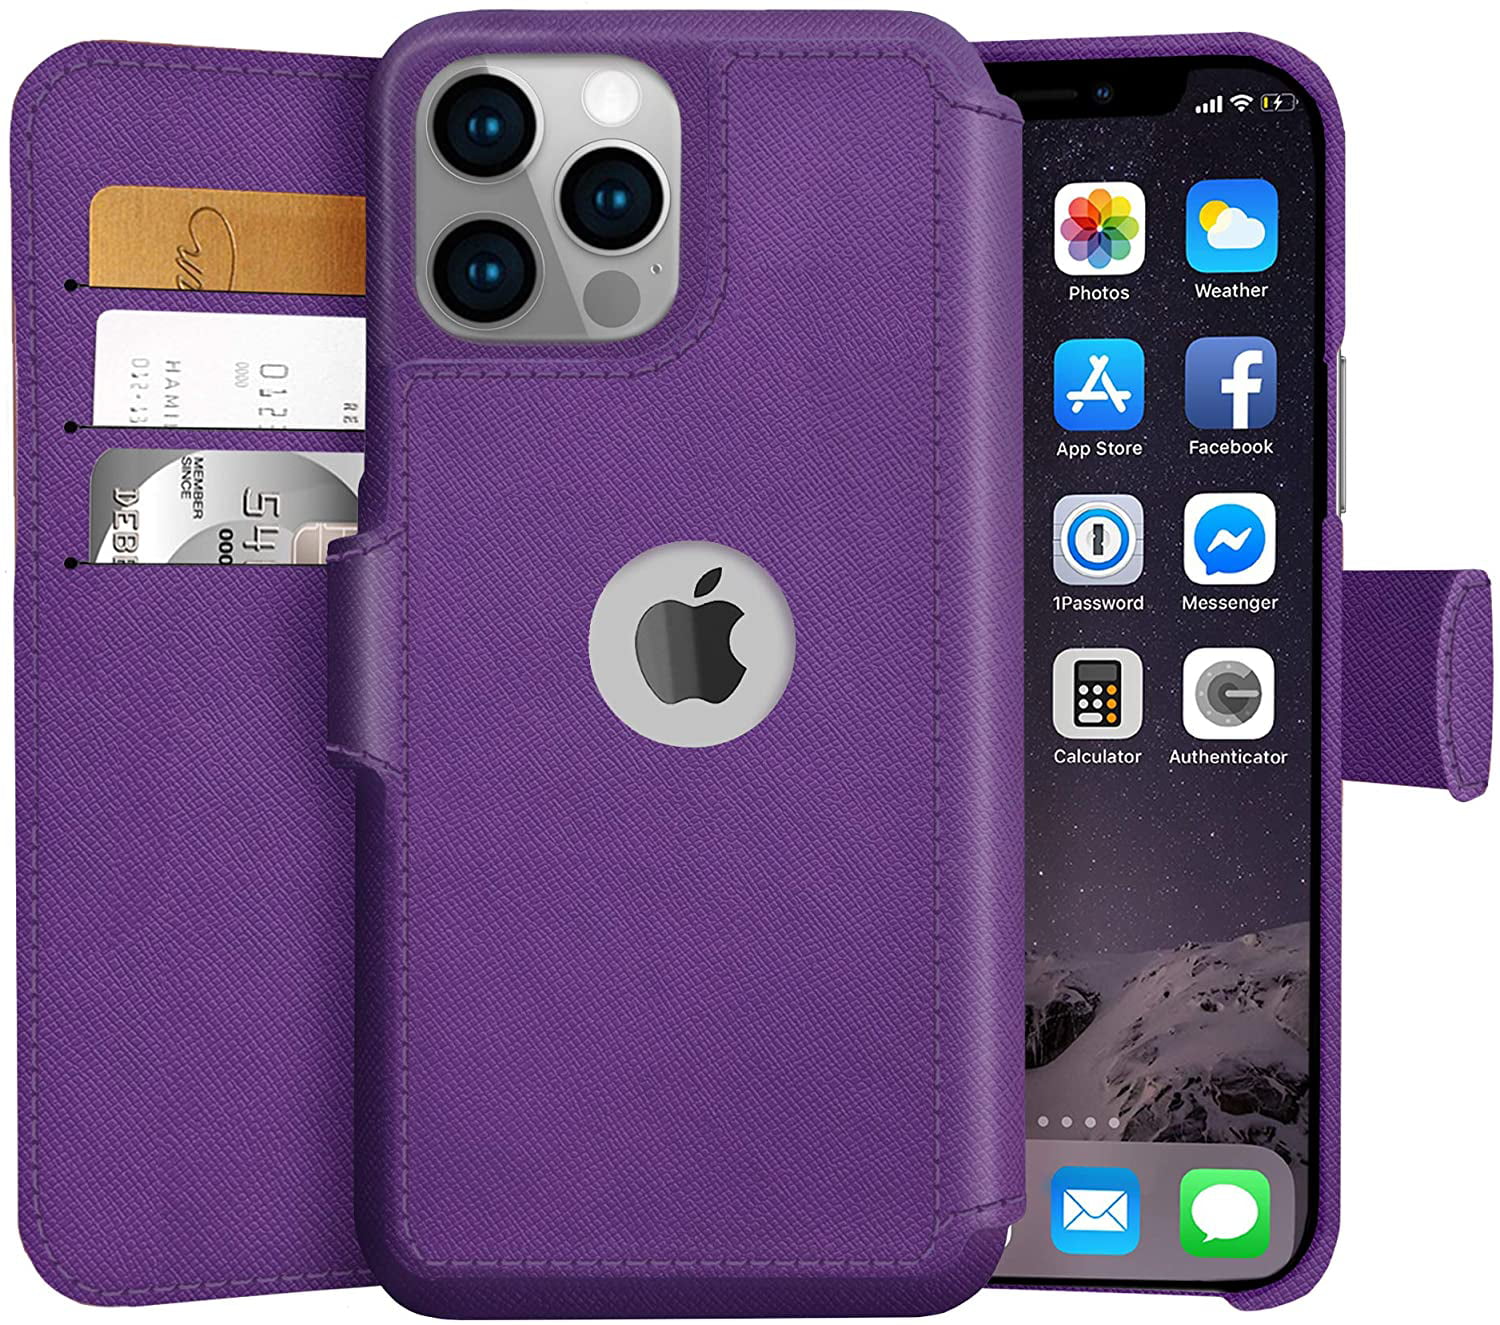 Dockem Flip Card Case for iPhone 14 Plus with Removable Minimalist Wallet